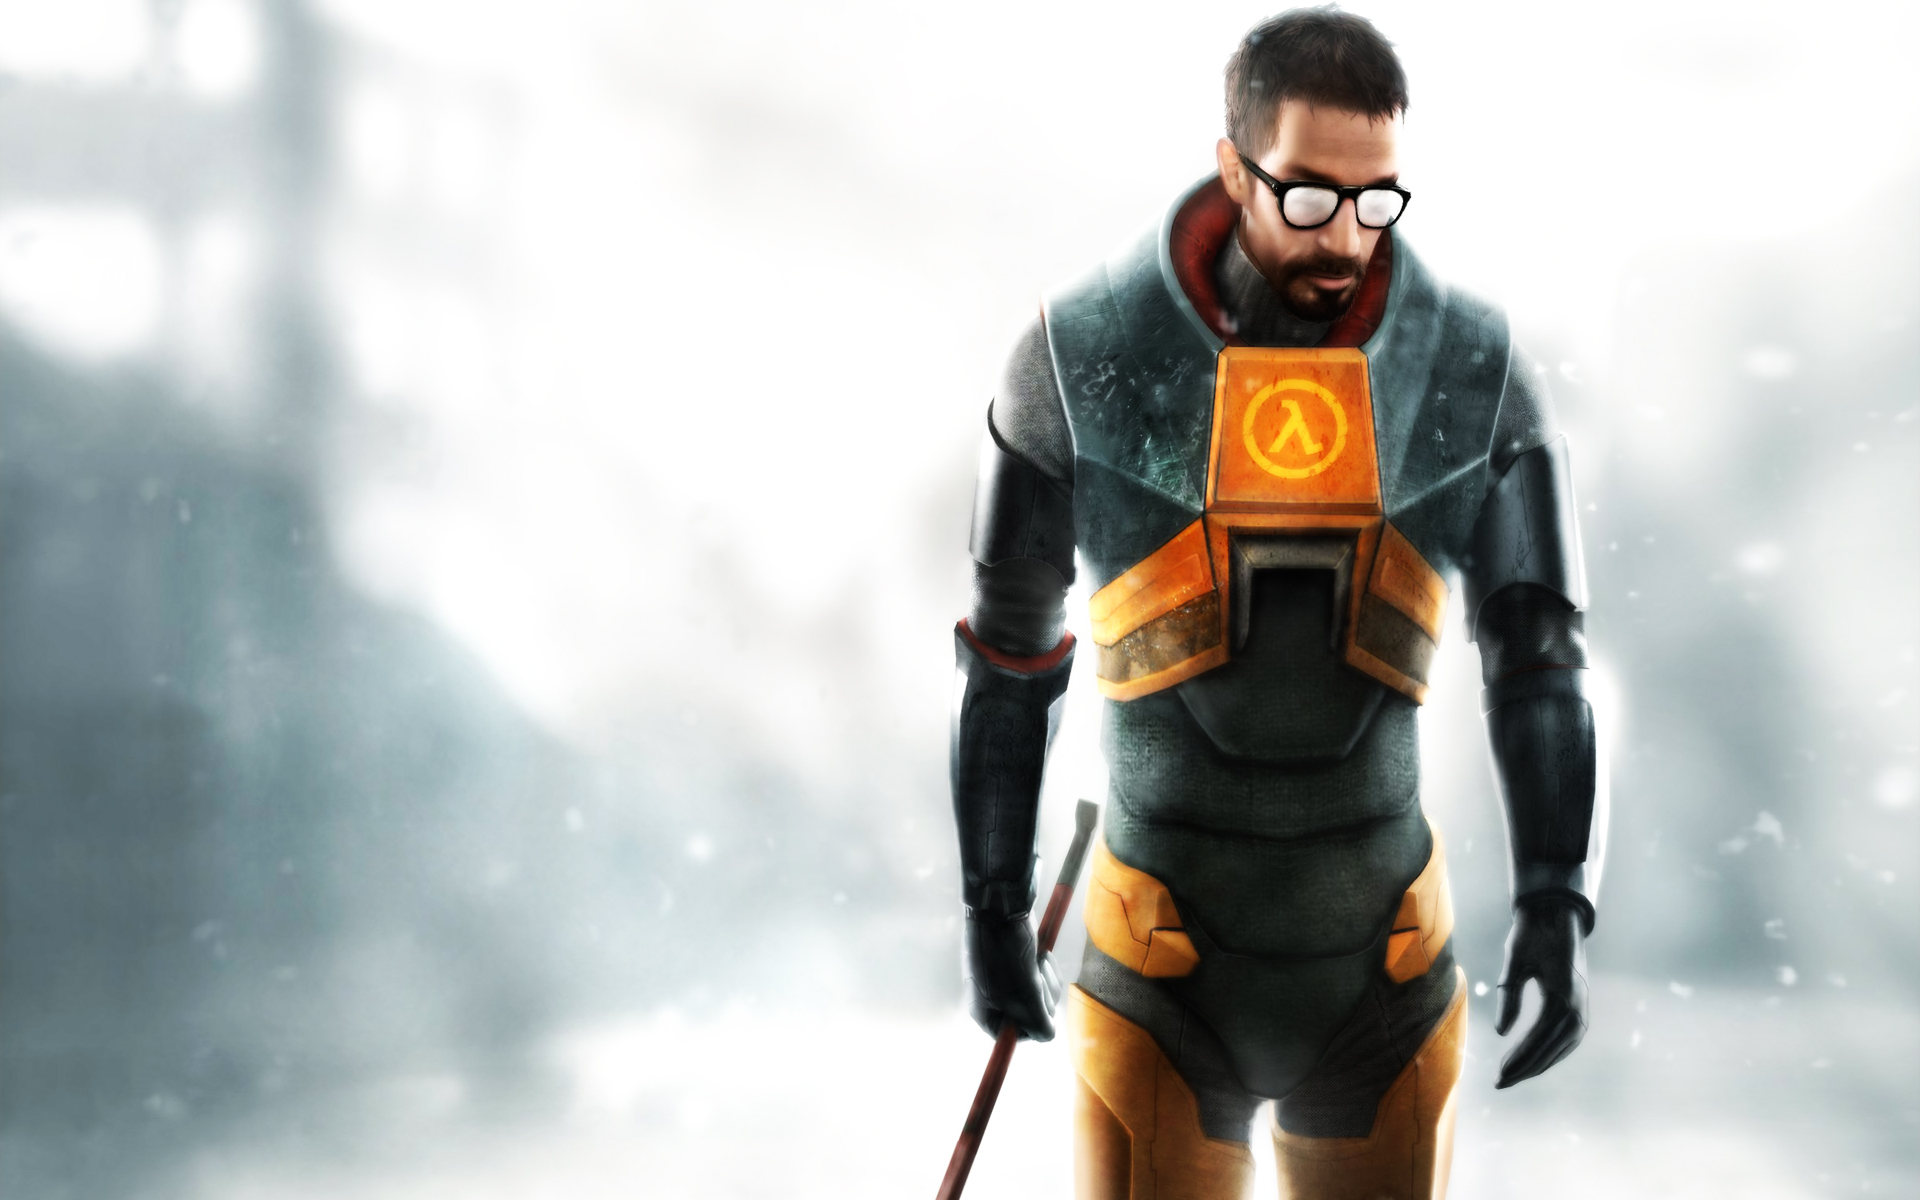 Explore The Collection Half Life Video Game